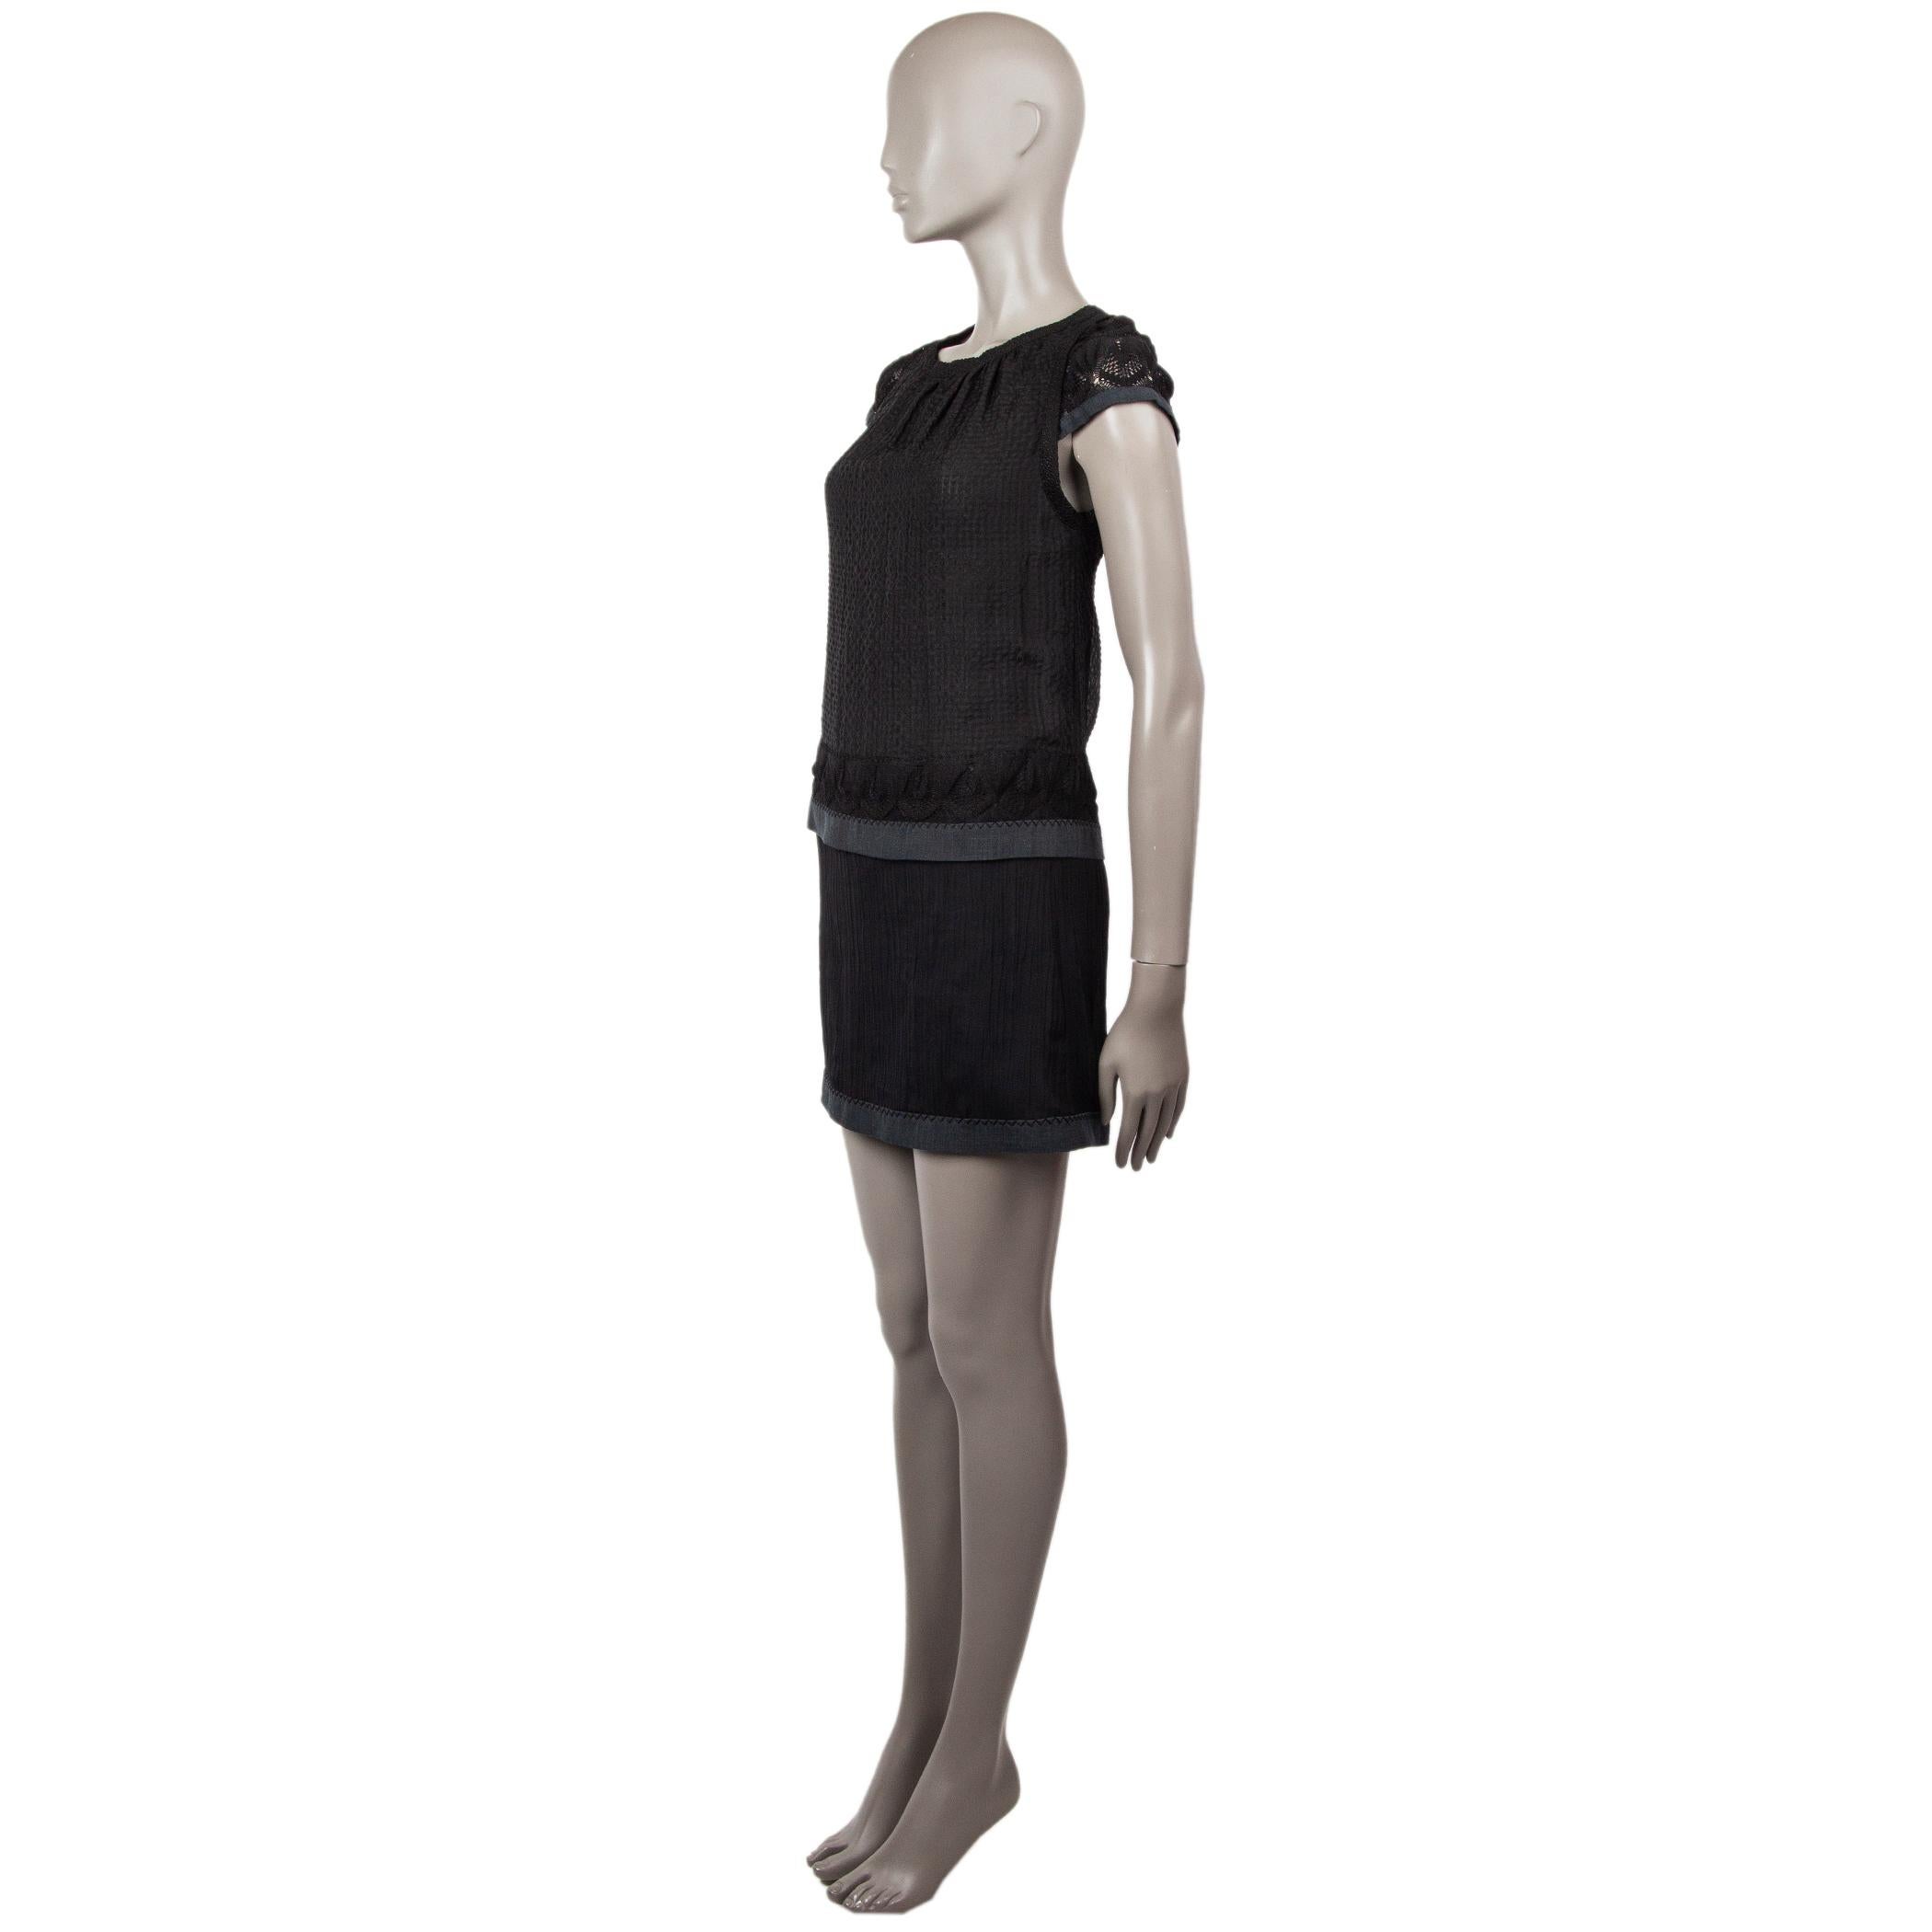 100% authentic Missoni short-sleeve crochet mini dress in black and charcoal silk (60%) and rayon (40%). With embossed tank-top layer and crepe skirt. Closes with flat buttons in colored bamboo on the back. Has been worn and one button is missing,